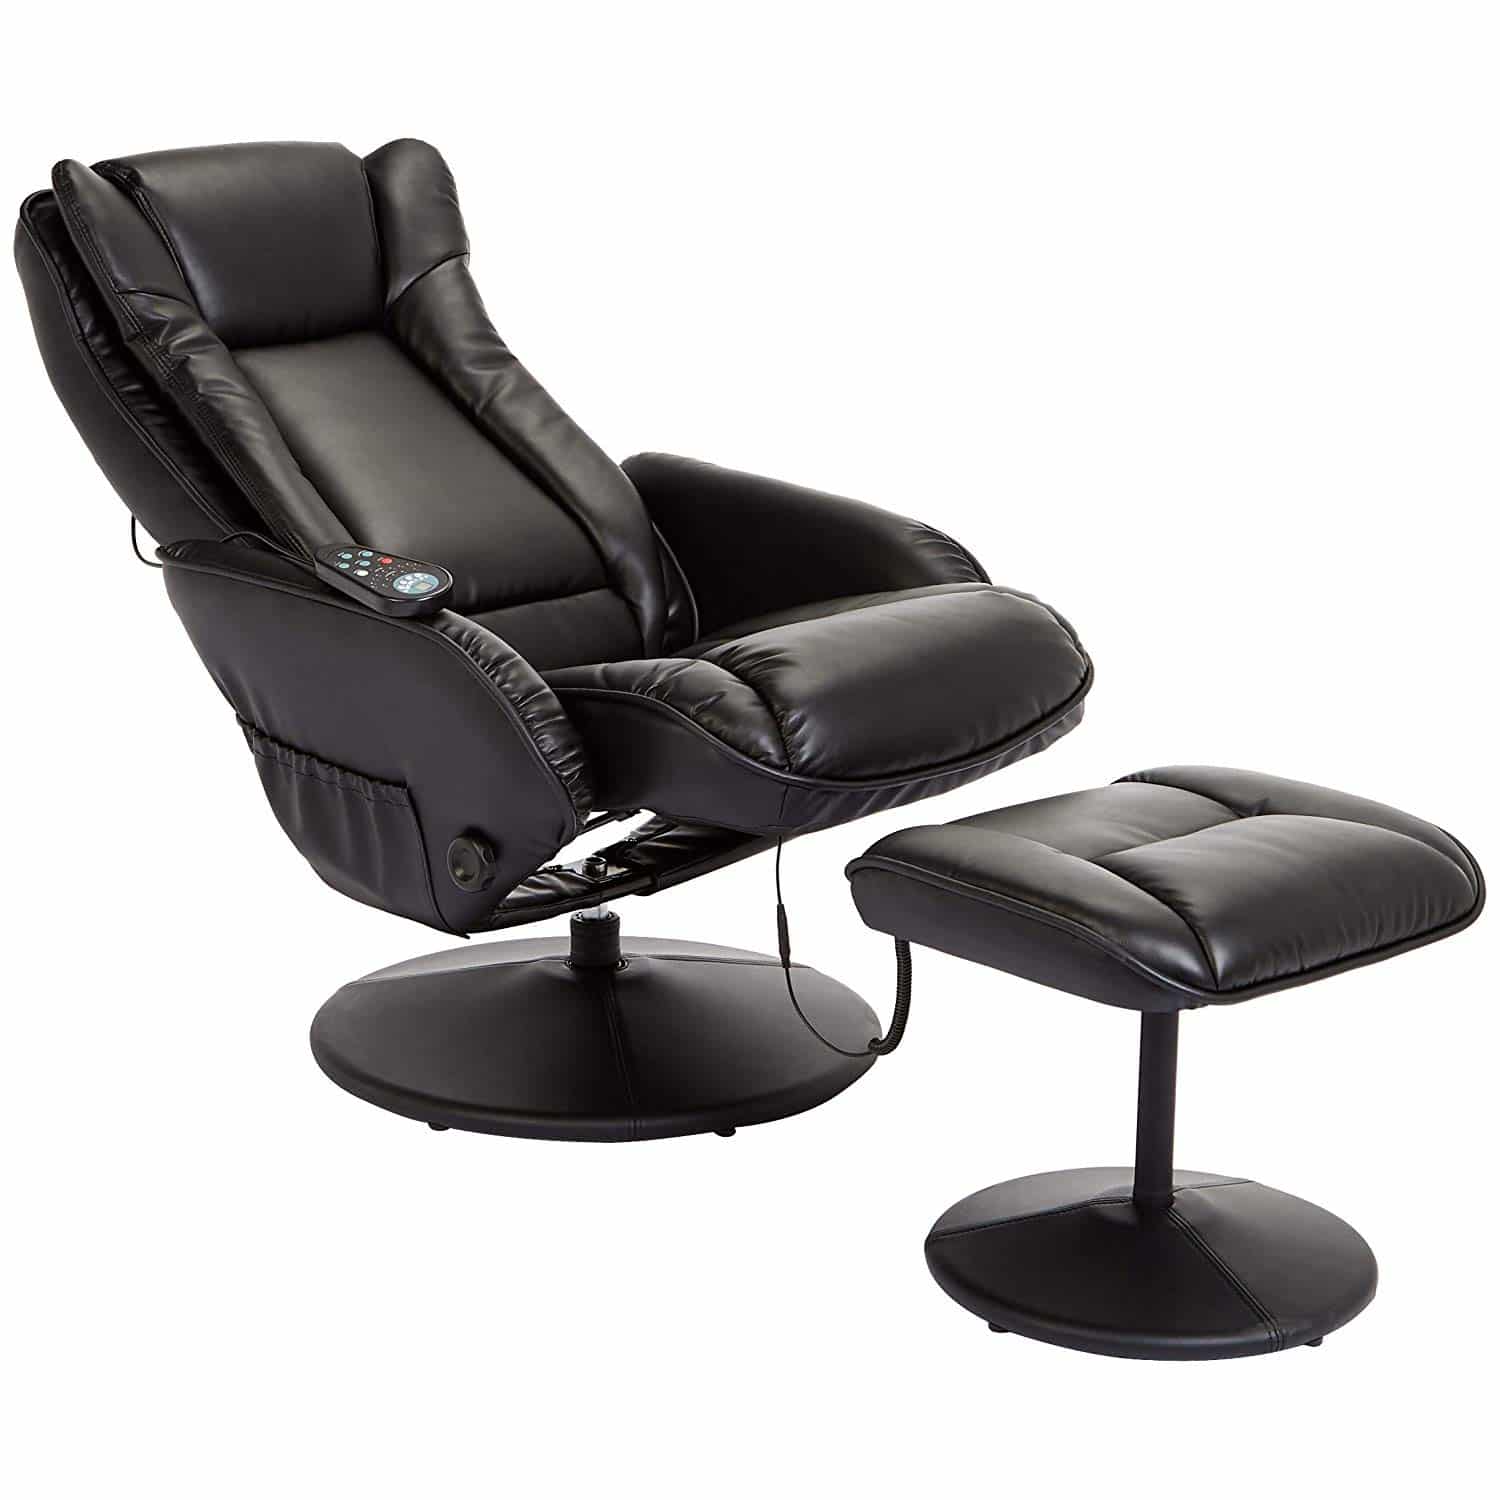 JC Home Drammen Massaging Leather Recliner and Ottoman